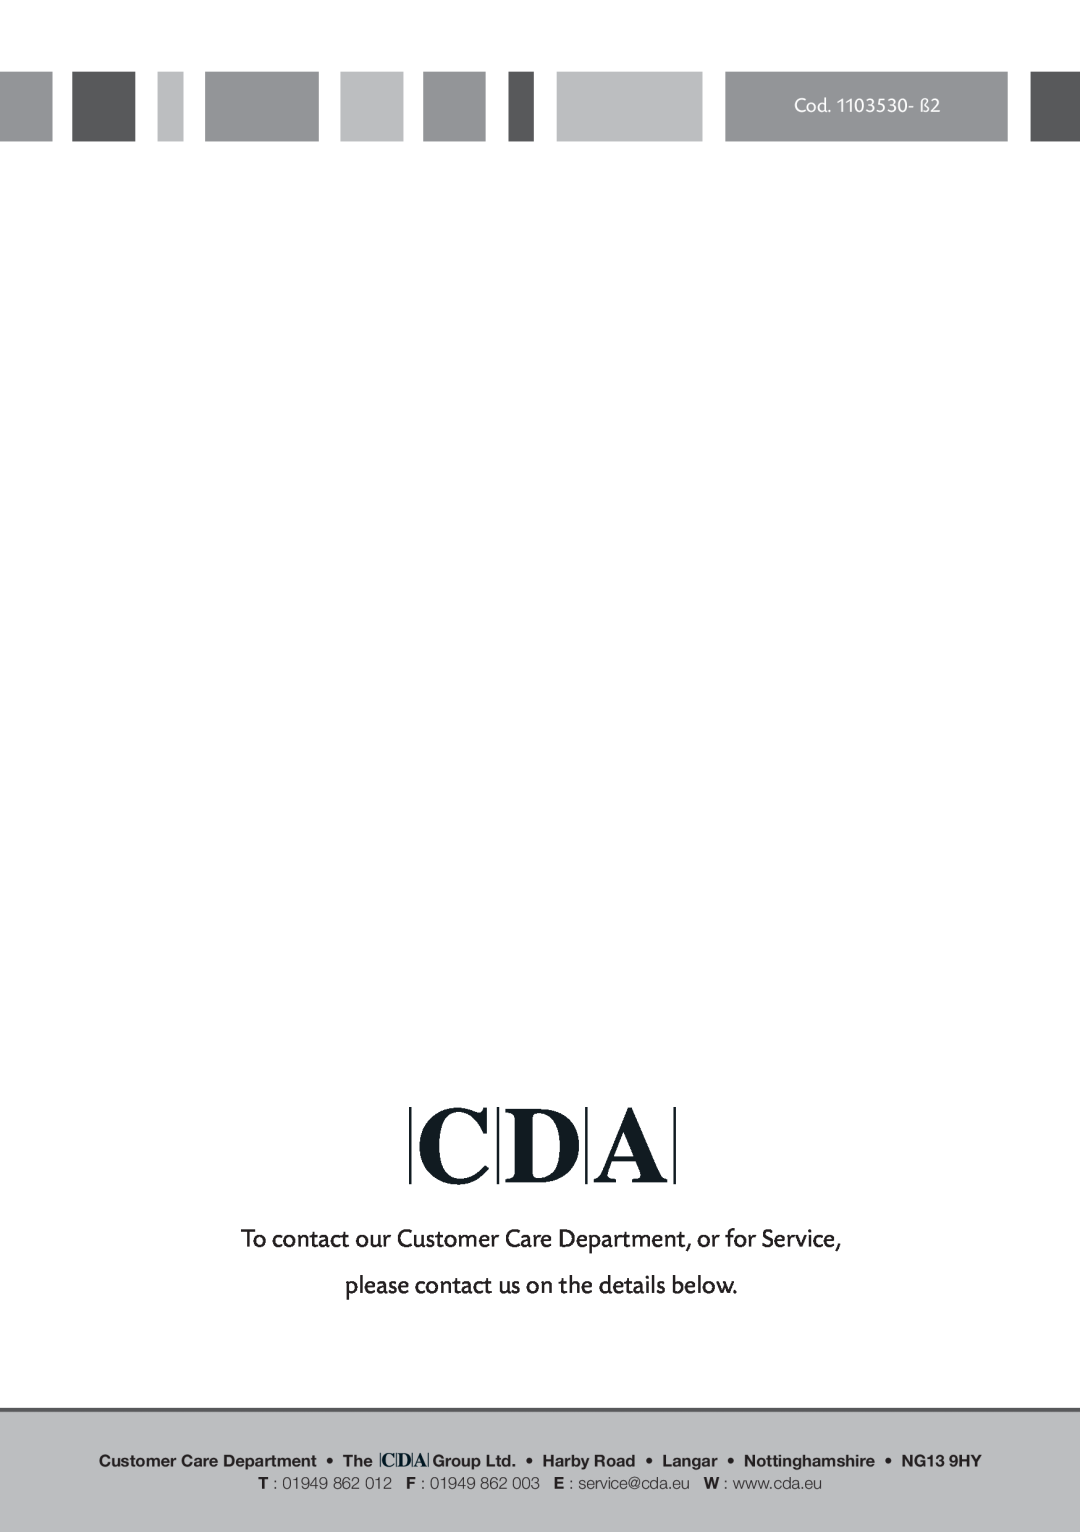 CDA DV 710 manual To contact our Customer Care Department, or for Service, please contact us on the details below 